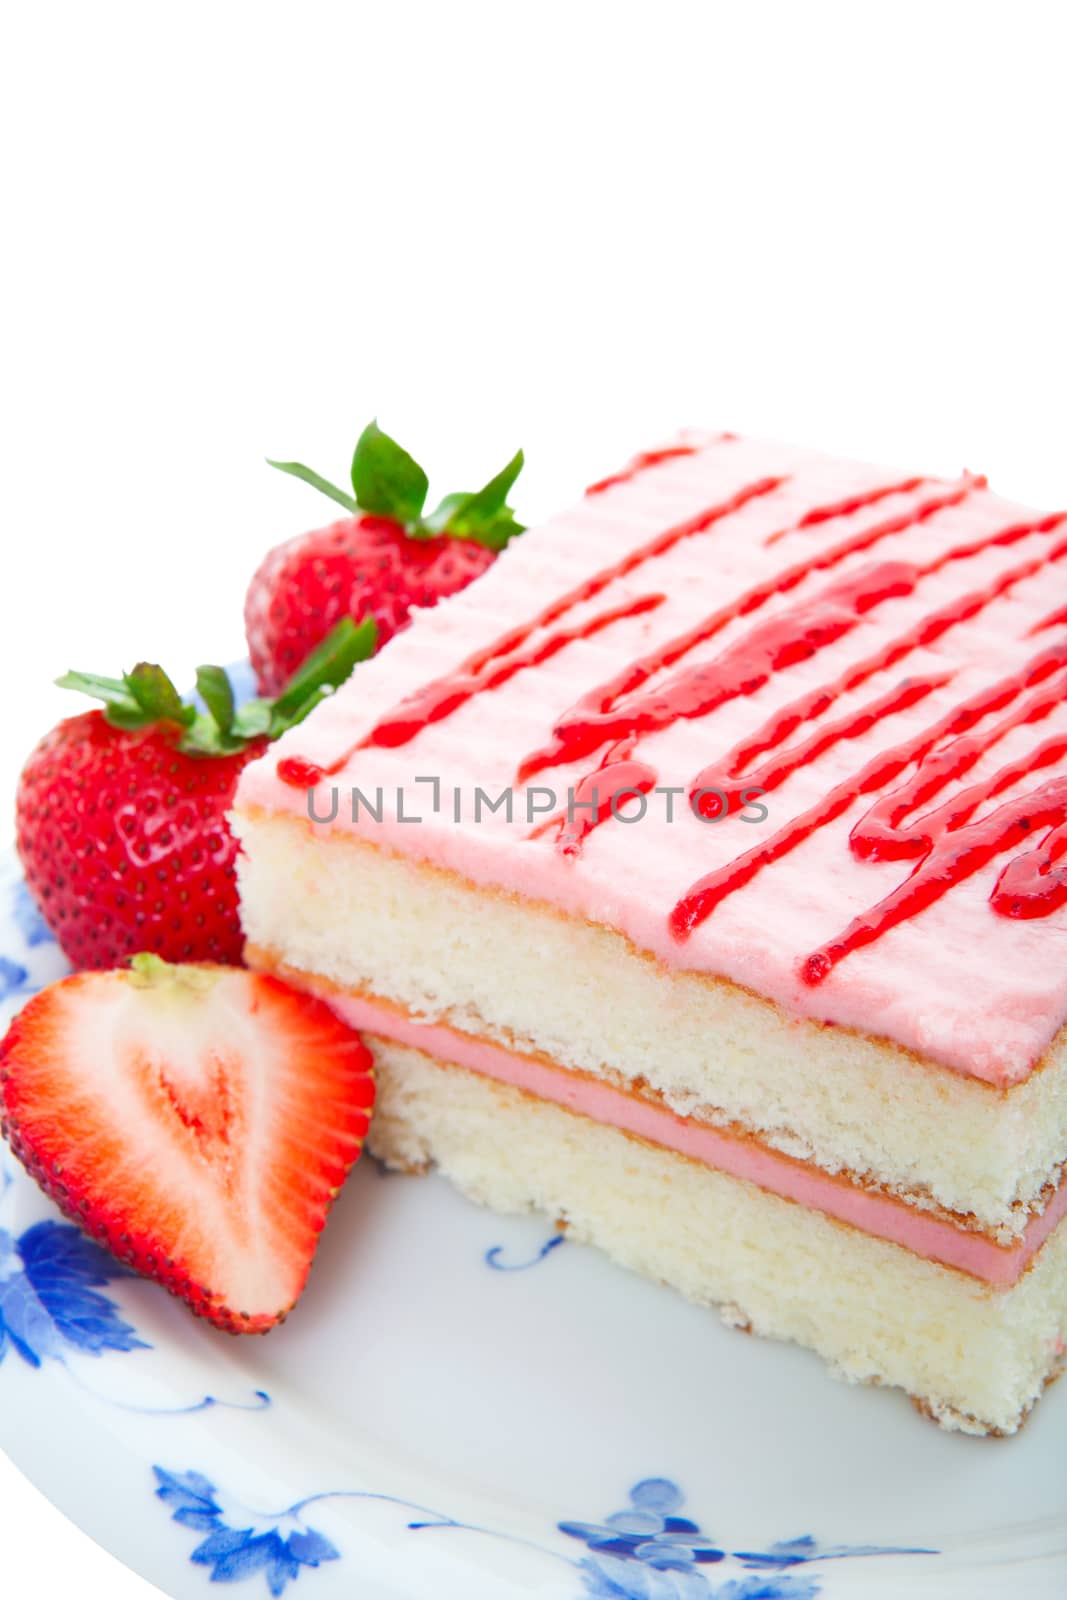 Strawberry layer cake served with fresh strawberries.  Shot on white background.